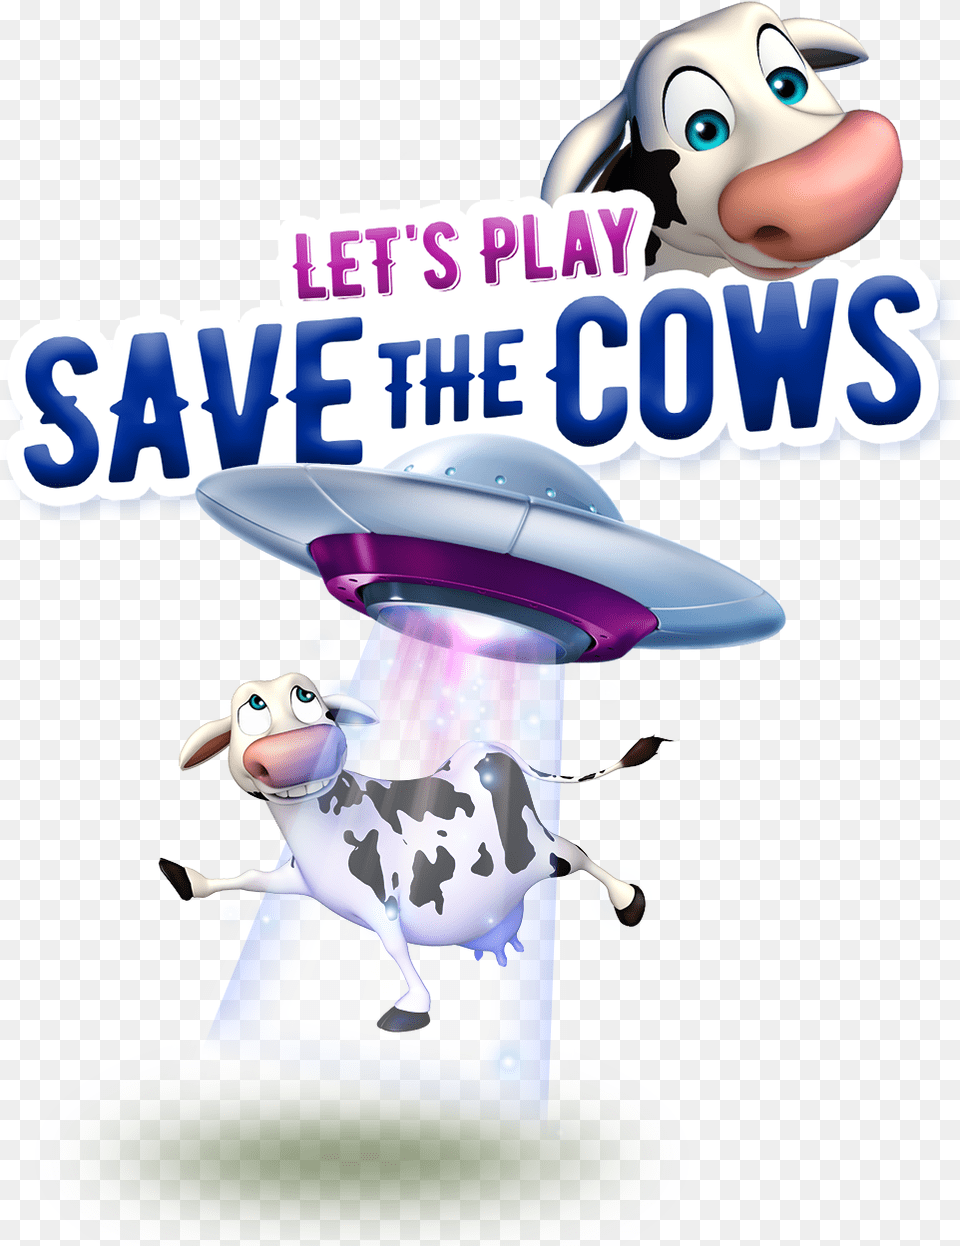 How To Play On Snapchat Save The Cows Puck, Animal, Cattle, Cow, Livestock Png Image